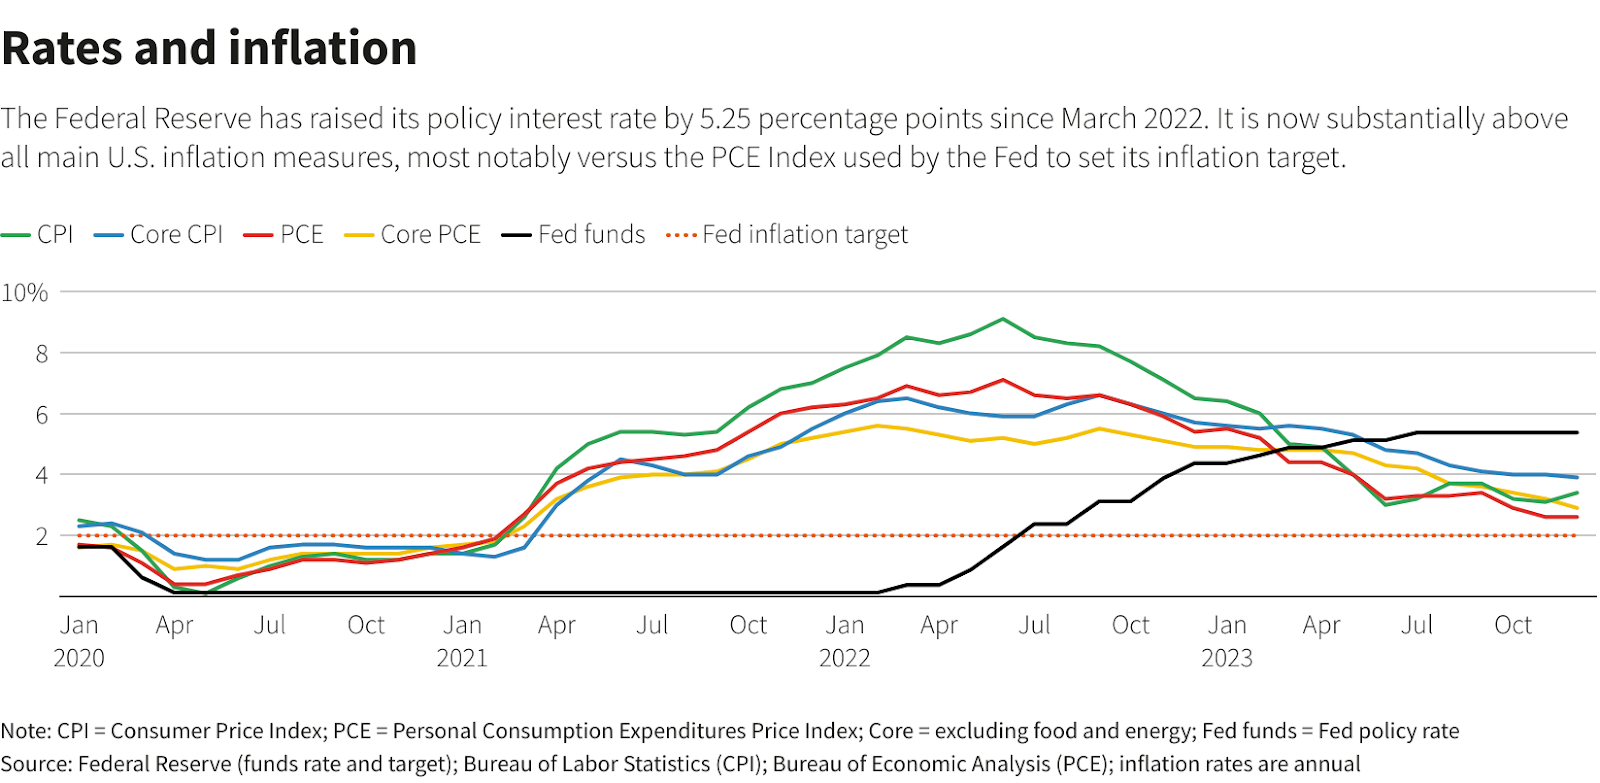 Rates and inflation from federal reserve